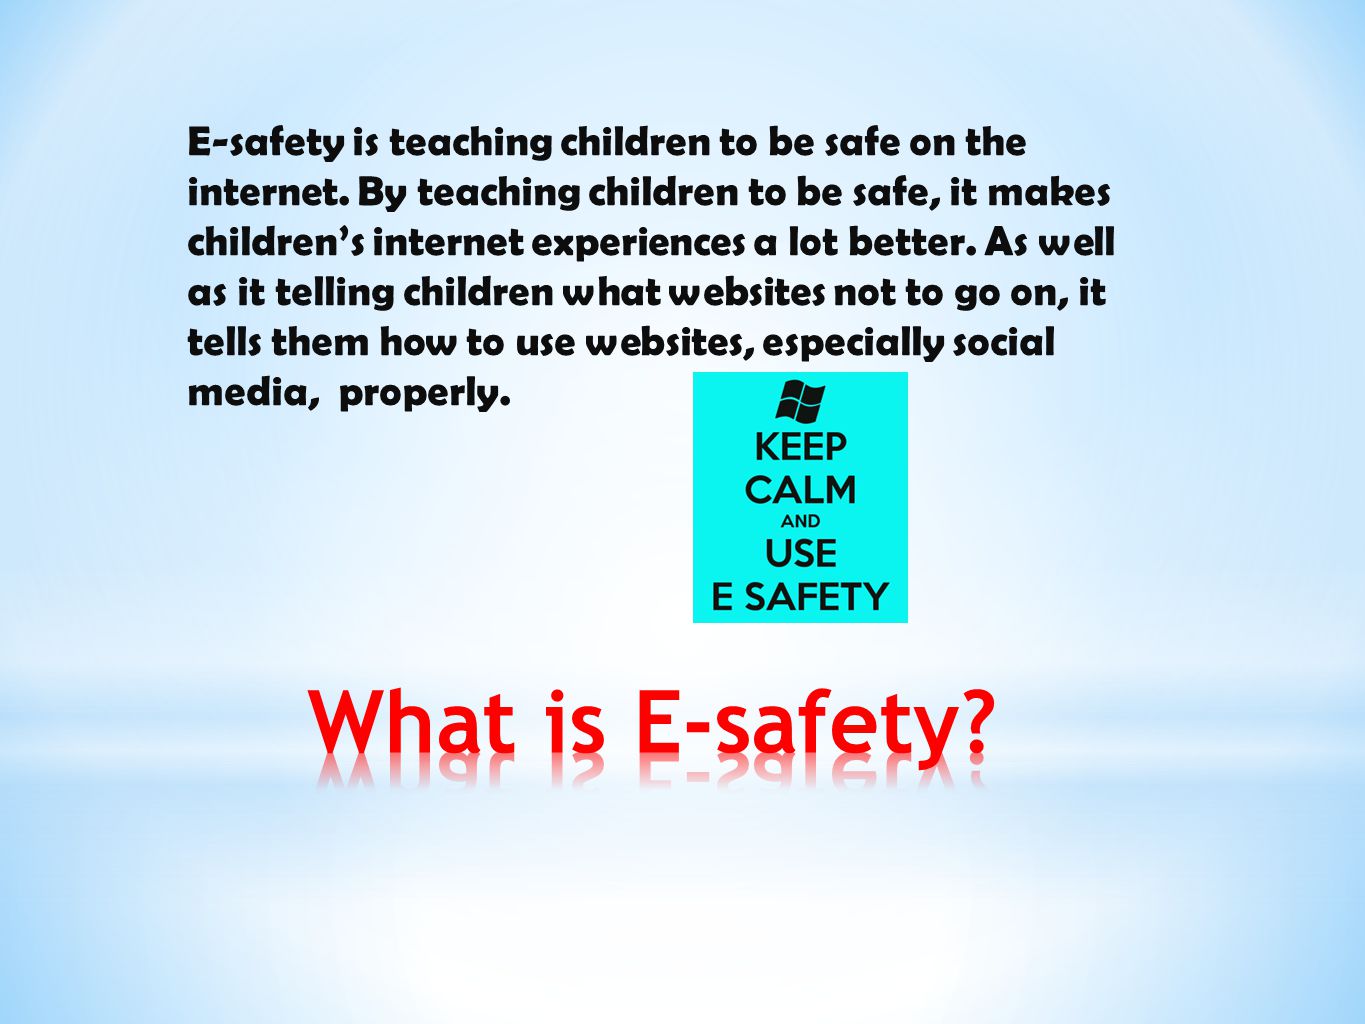 E-safety is teaching children to be safe on the internet